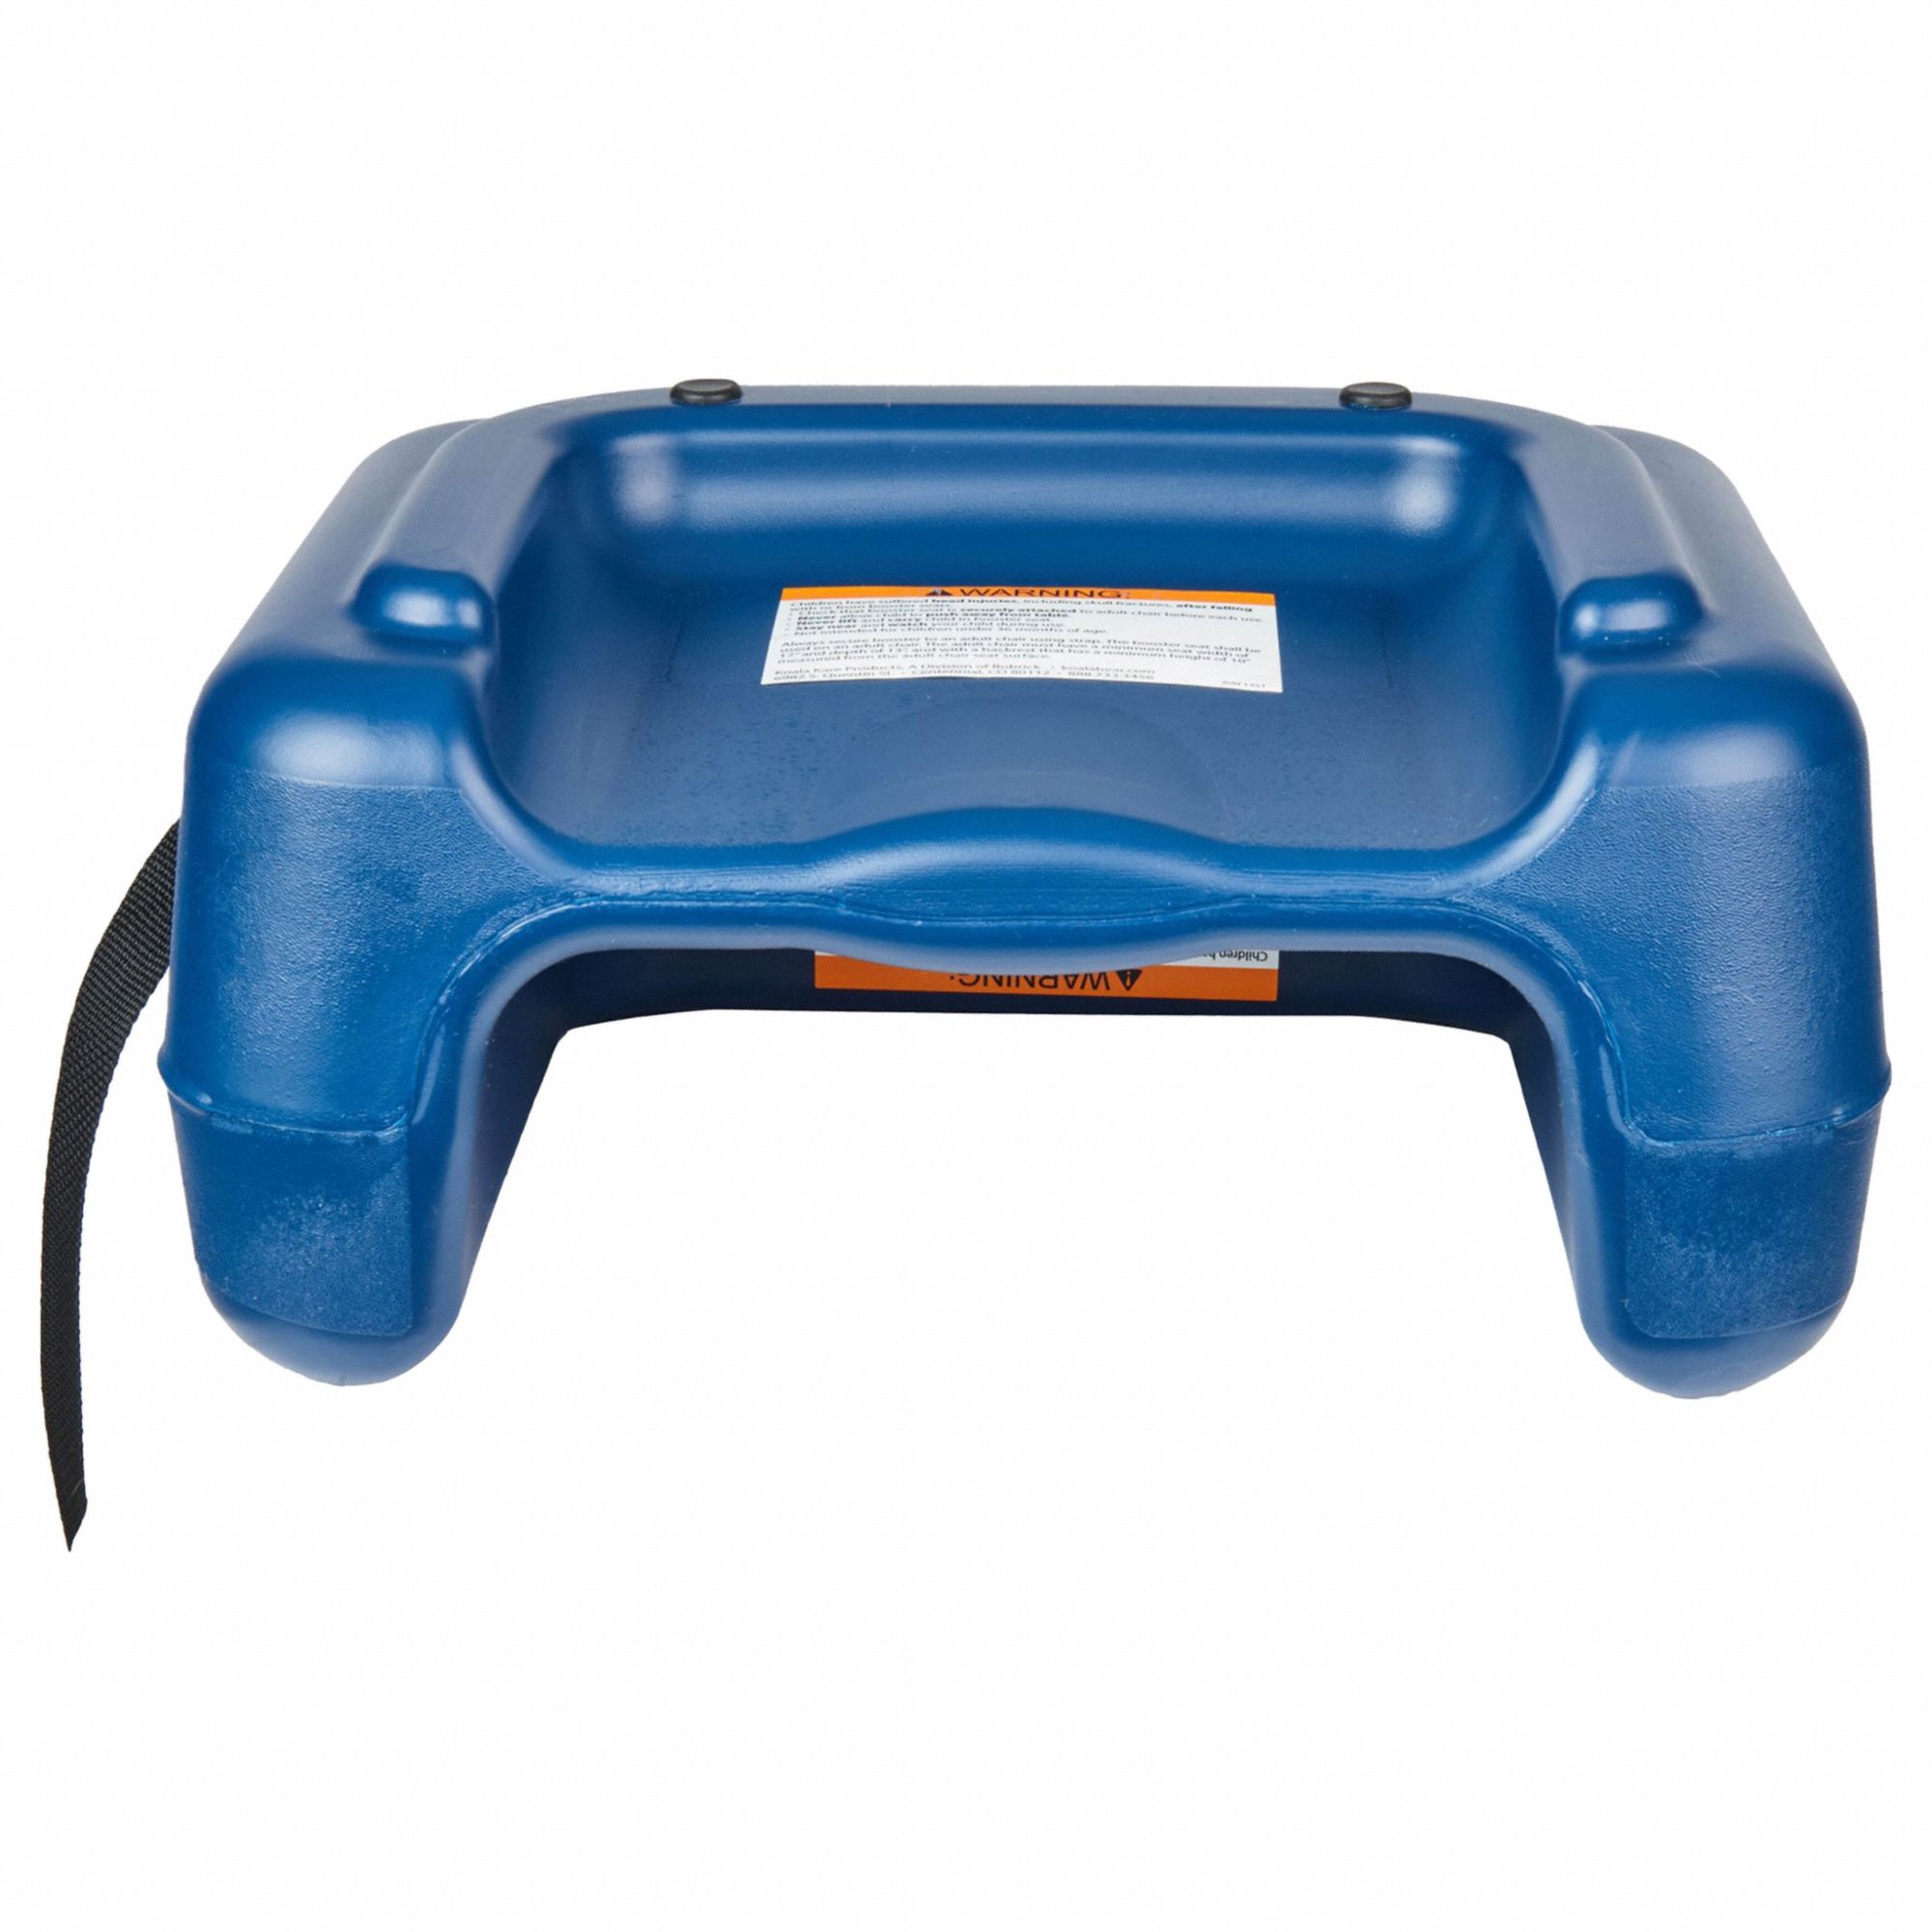 Booster Seat: Plastic, Blue, 15 1/2 in Wd, 12 in Dp, 8 in Ht